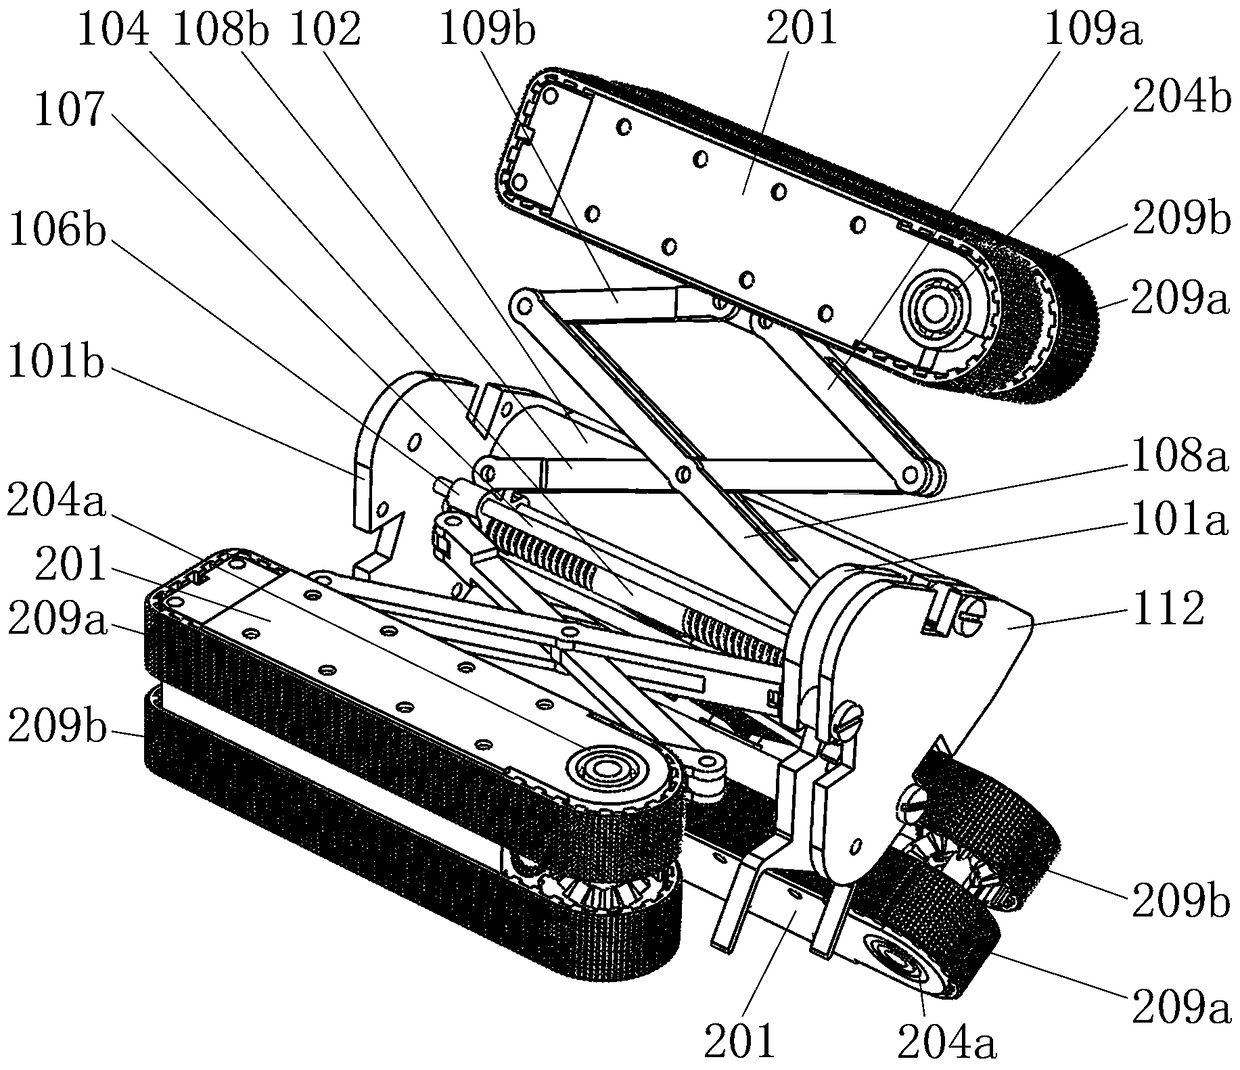 Variable-diameter crawler-type robot mechanism used for colon diagnoses and examinations